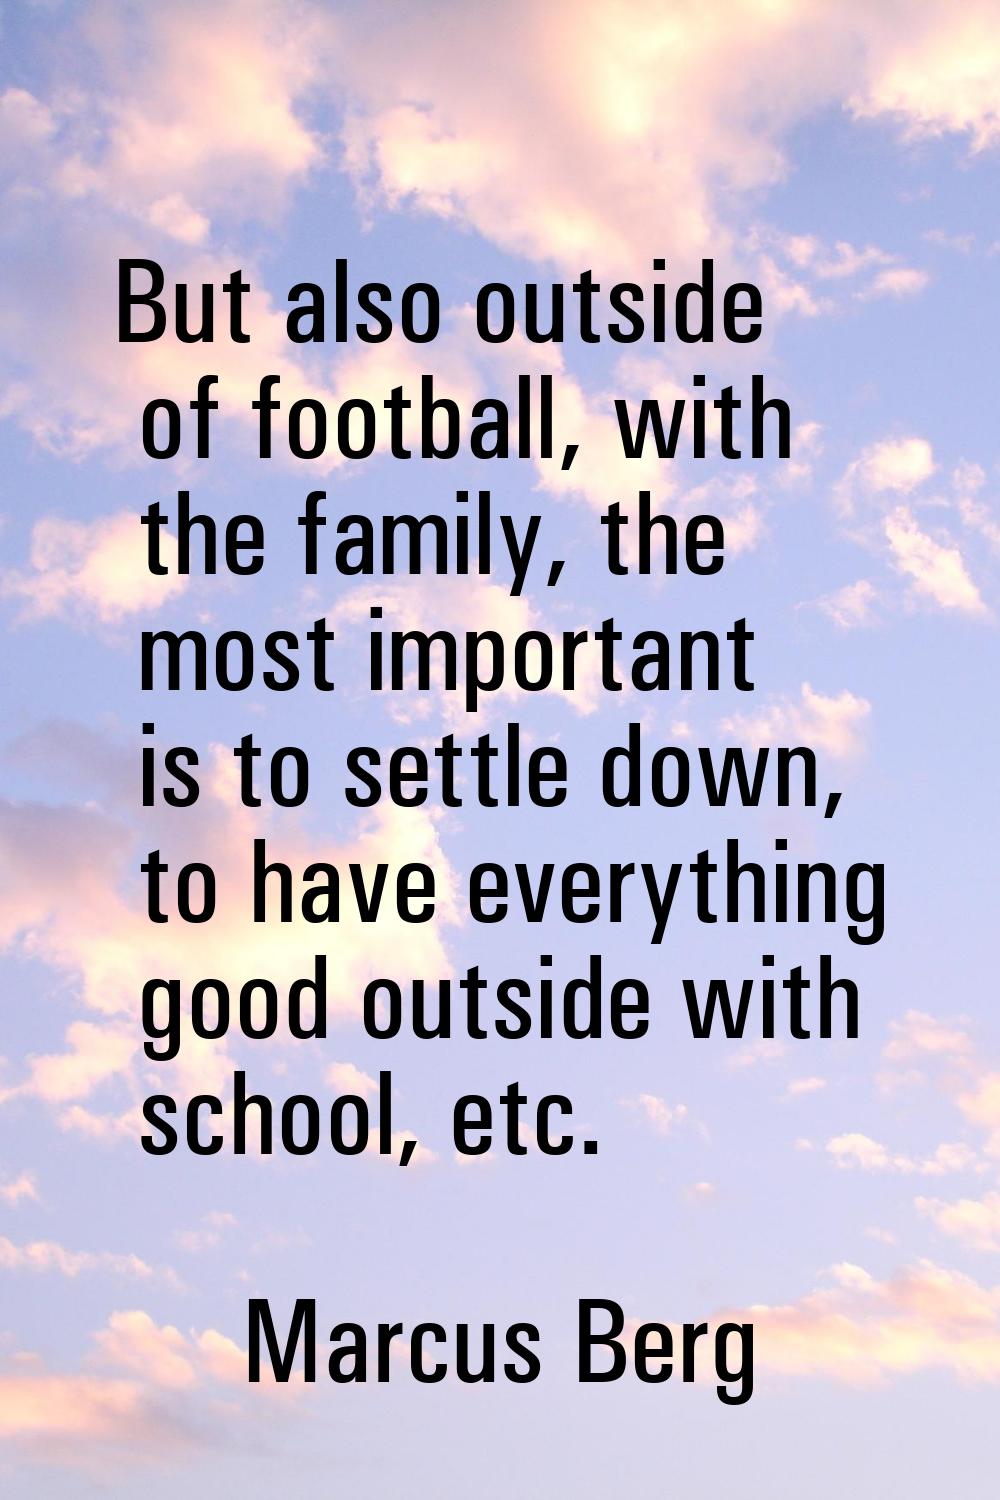 But also outside of football, with the family, the most important is to settle down, to have everyt